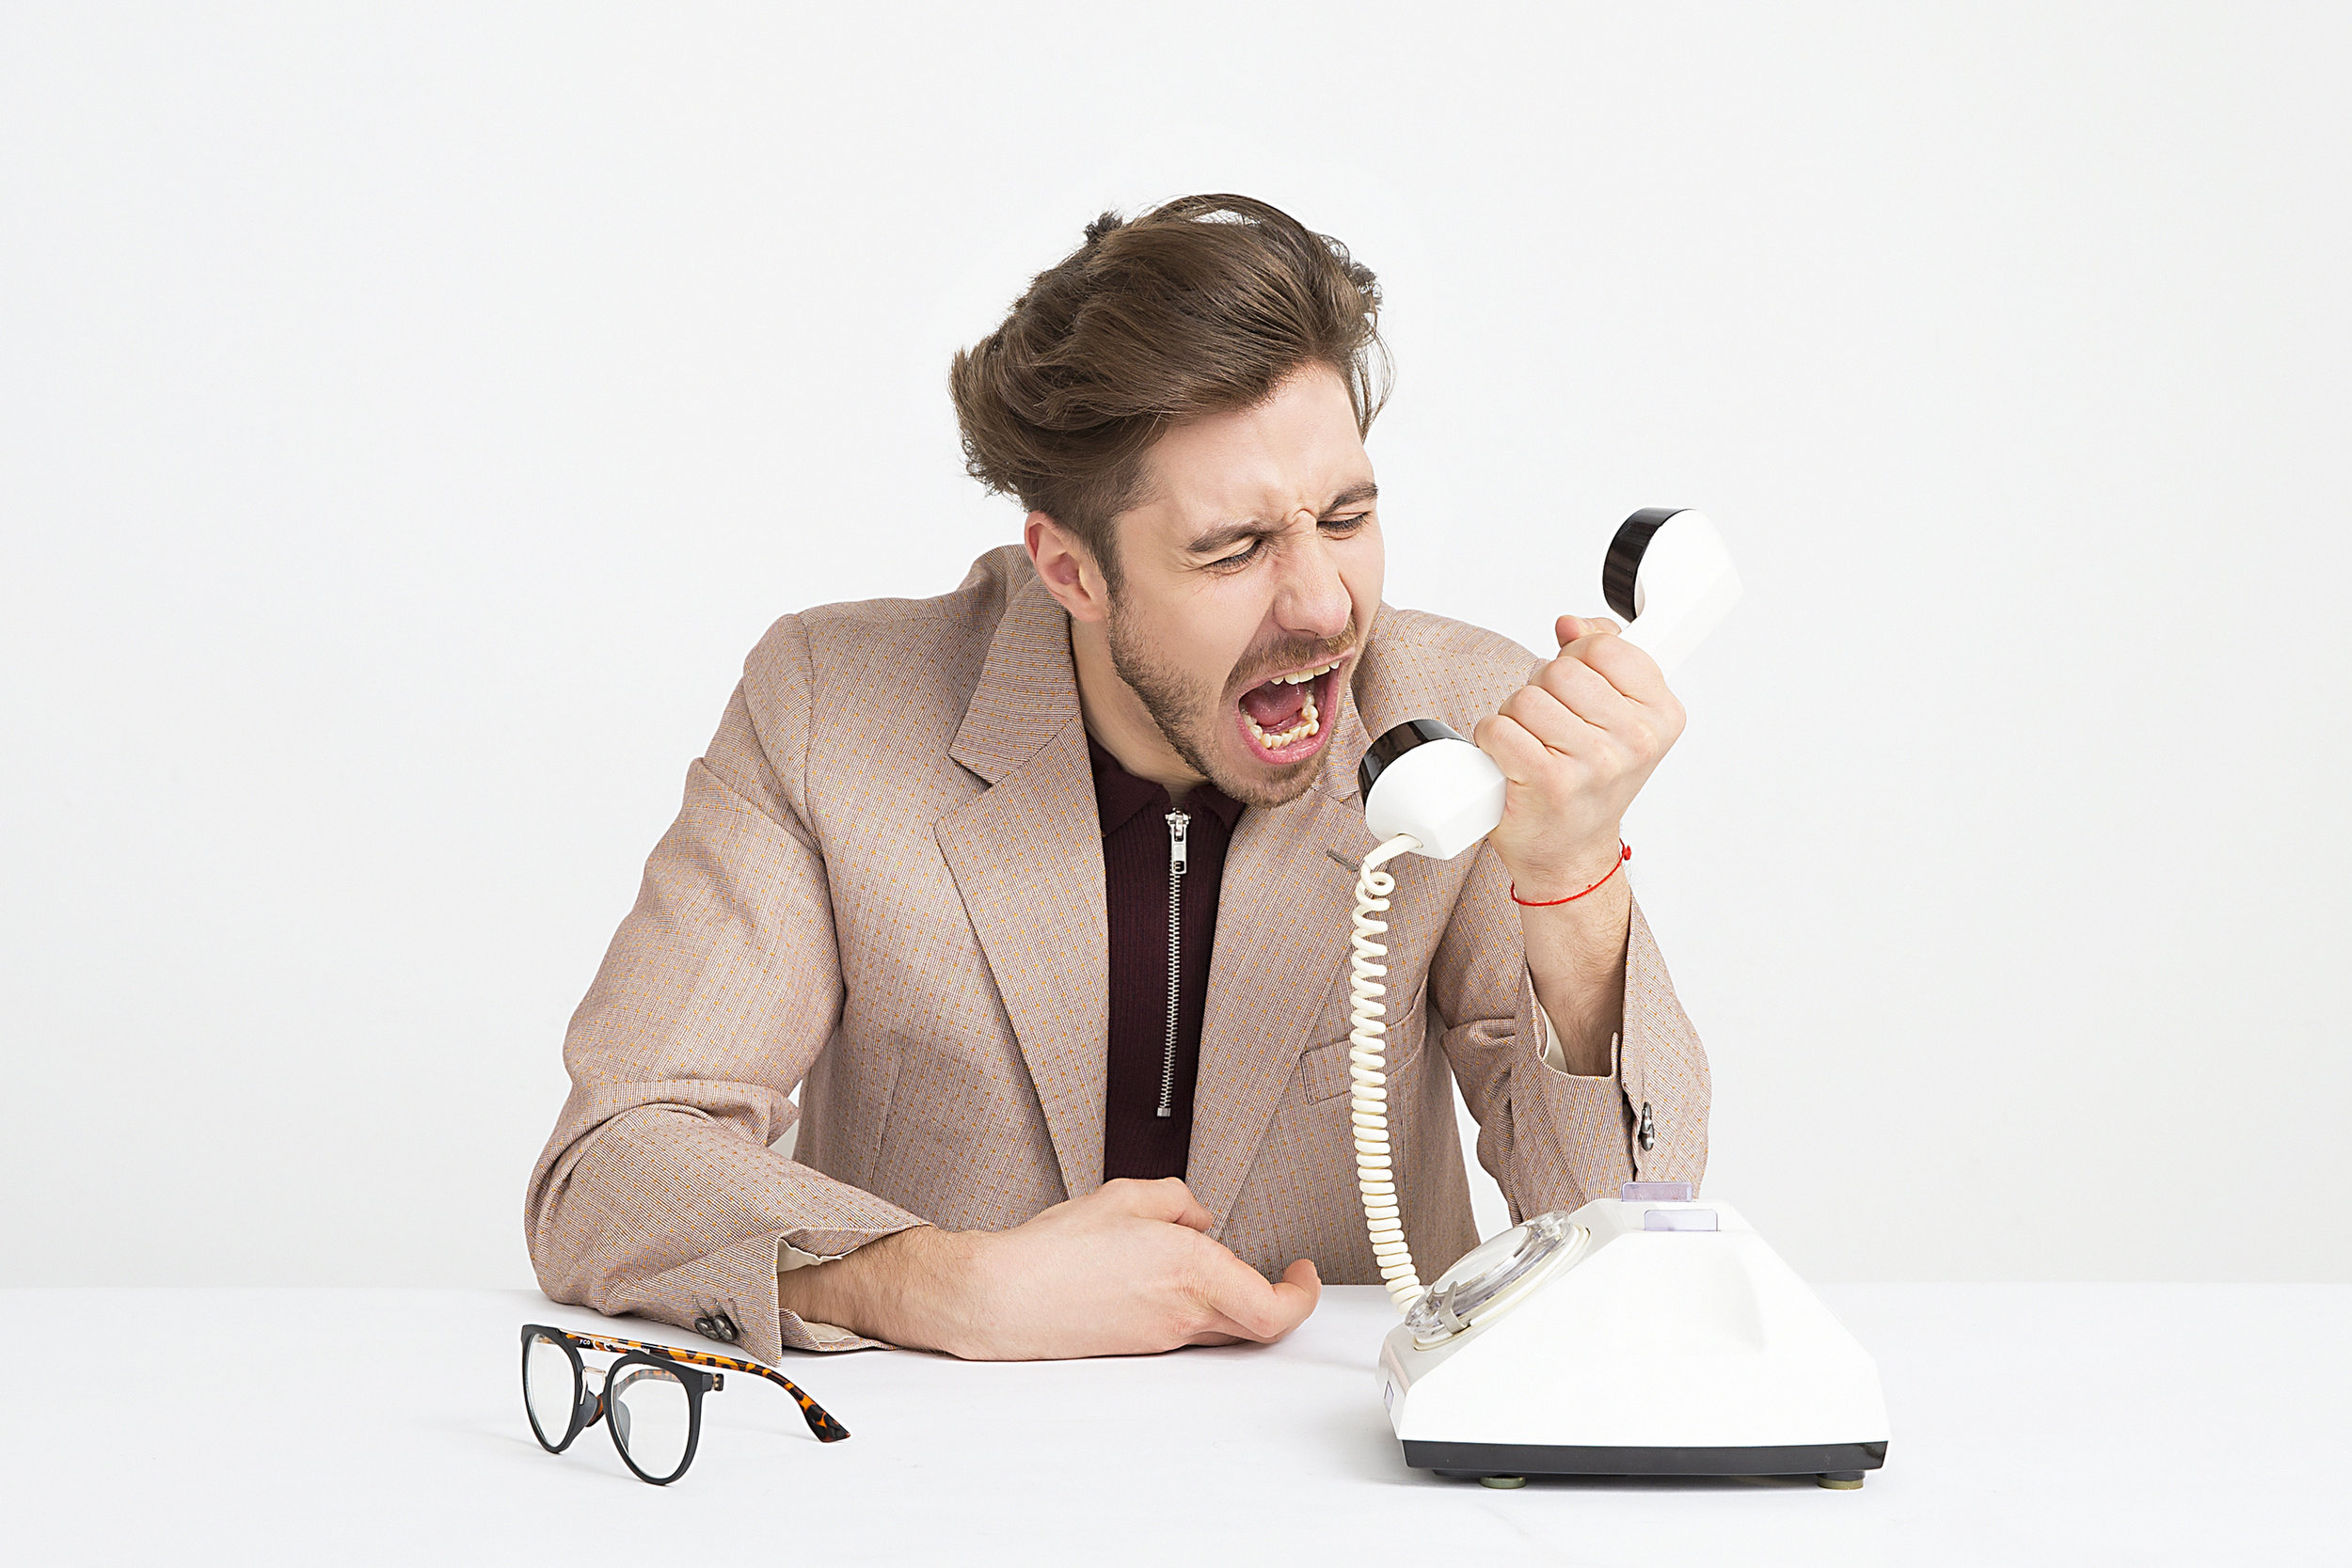 Man shouting into a phone handset